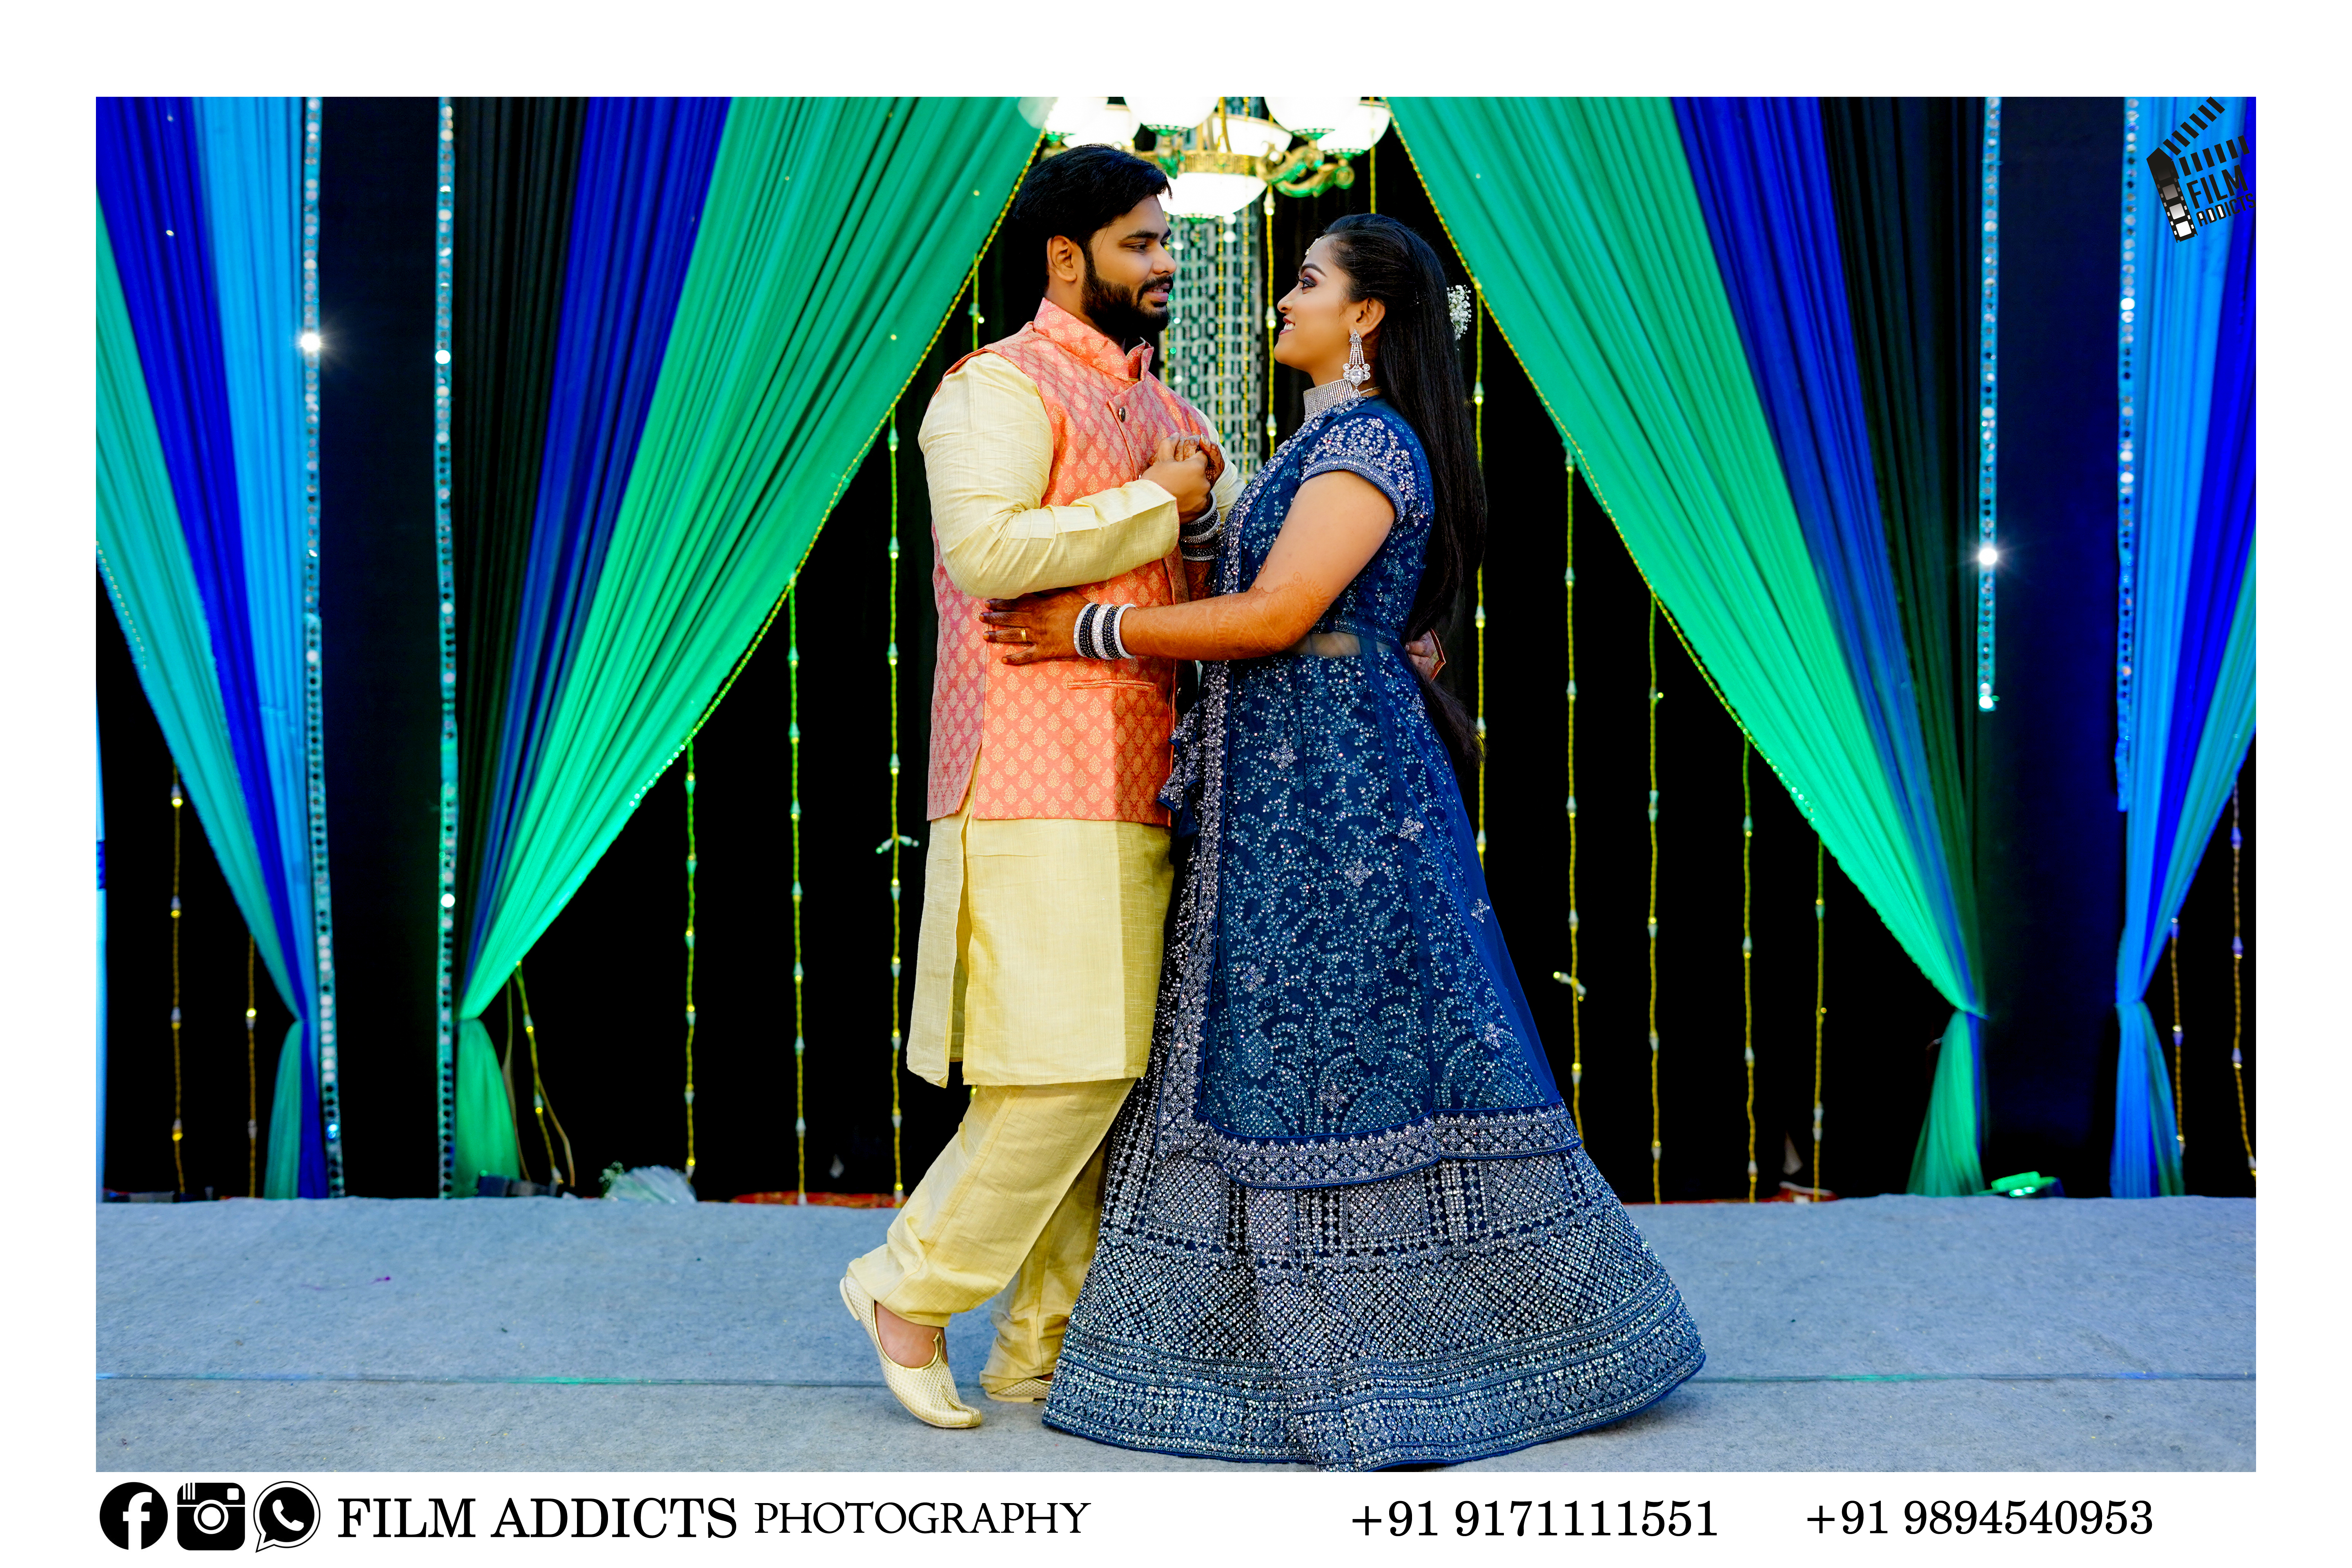 best-candid-photographers-in-karur,Candid-photography-in-karur,best-wedding -photography-in-karur,Best-candid-photography-inb-karur,Best-candid-photographer,candid-photographer-in-karur,drone-photographer-in-karur,helicam-photographer-in-karur,candid-wedding-photographers-in-karur,photographers-in-karur,professional-wedding-photographers-in-karur,top-wedding-filmmakers-in-karur,wedding-cinematographers-in-karur,wedding-cinimatography-in-karur,wedding-photographers-in-karur,wedding-teaser-in-karur, asian-wedding-photography-in-karur, best-candid-photographers-in-karur, best-candid-videographers-in-karur,best-photographers-in-karur best-wedding-photographers-in-karur, 
best-nadar-wedding-photography-in-karur,candid-photographers-in-karur,destination-wedding-photographers-in-karur,fashion-photographers-in-karur, karur-famous-stage-decorations